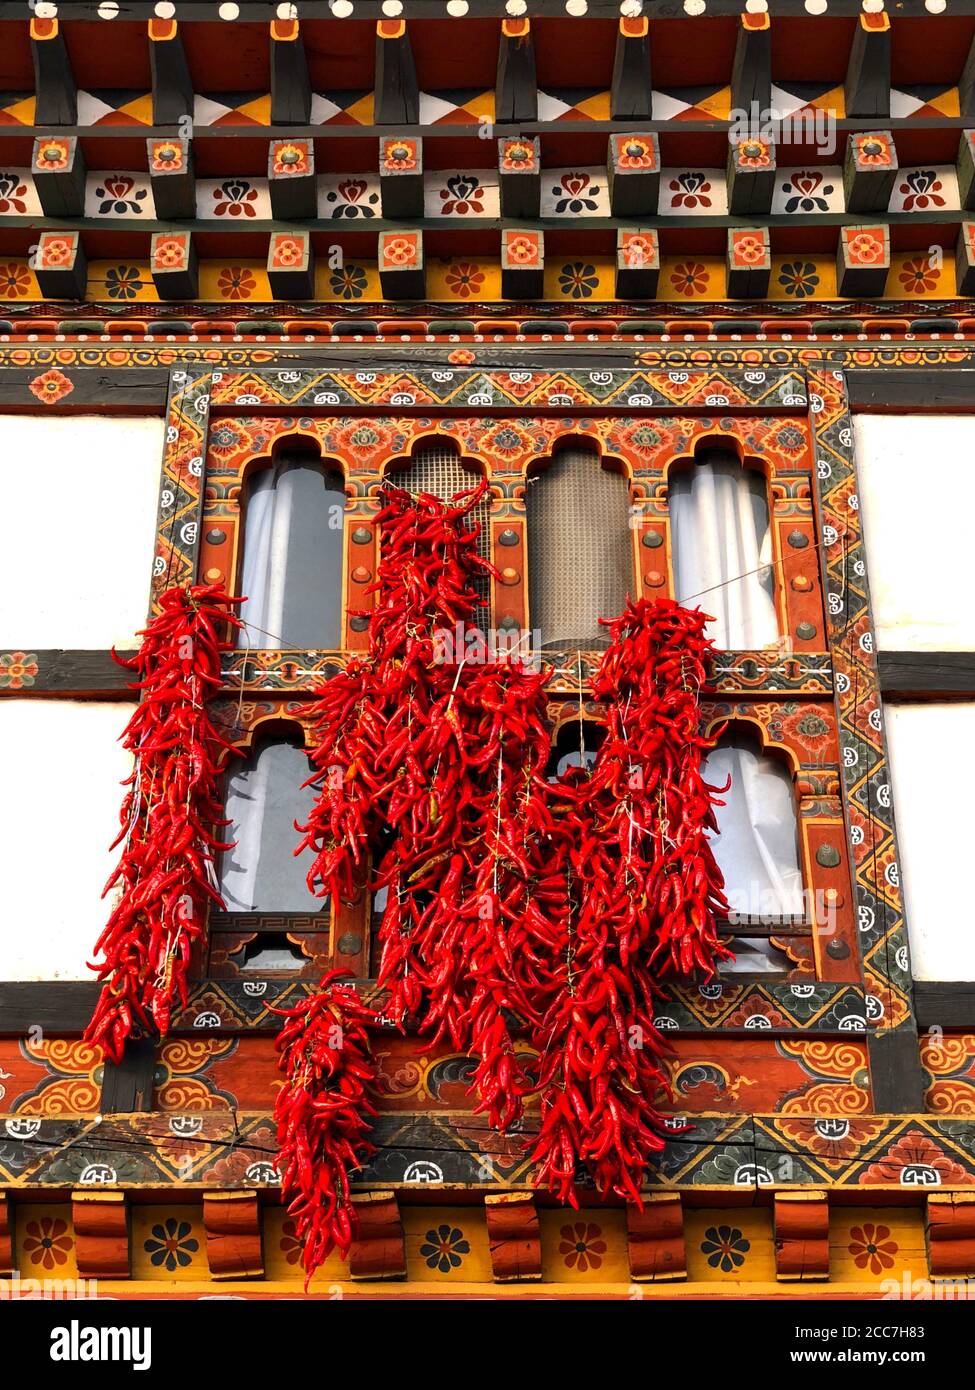 Red Chilli Peppers Hung to Dry Outside a Window in Bhutan Stock Photo